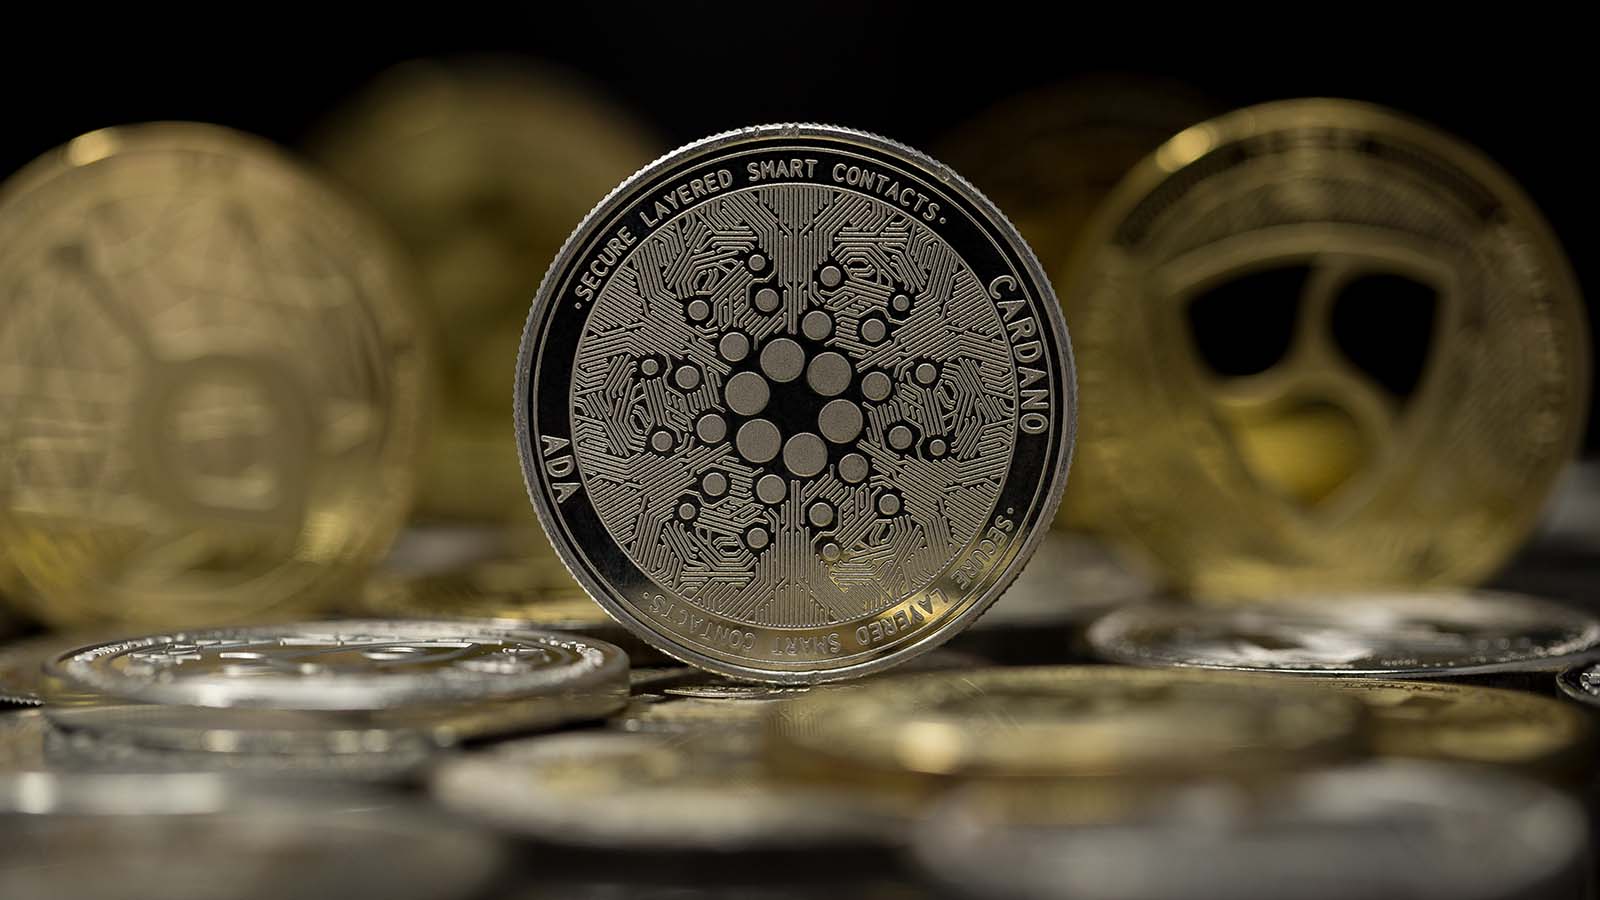 The Cardano (ADA) token with other gold and silver tokens in the background representing Cardano price predictions.